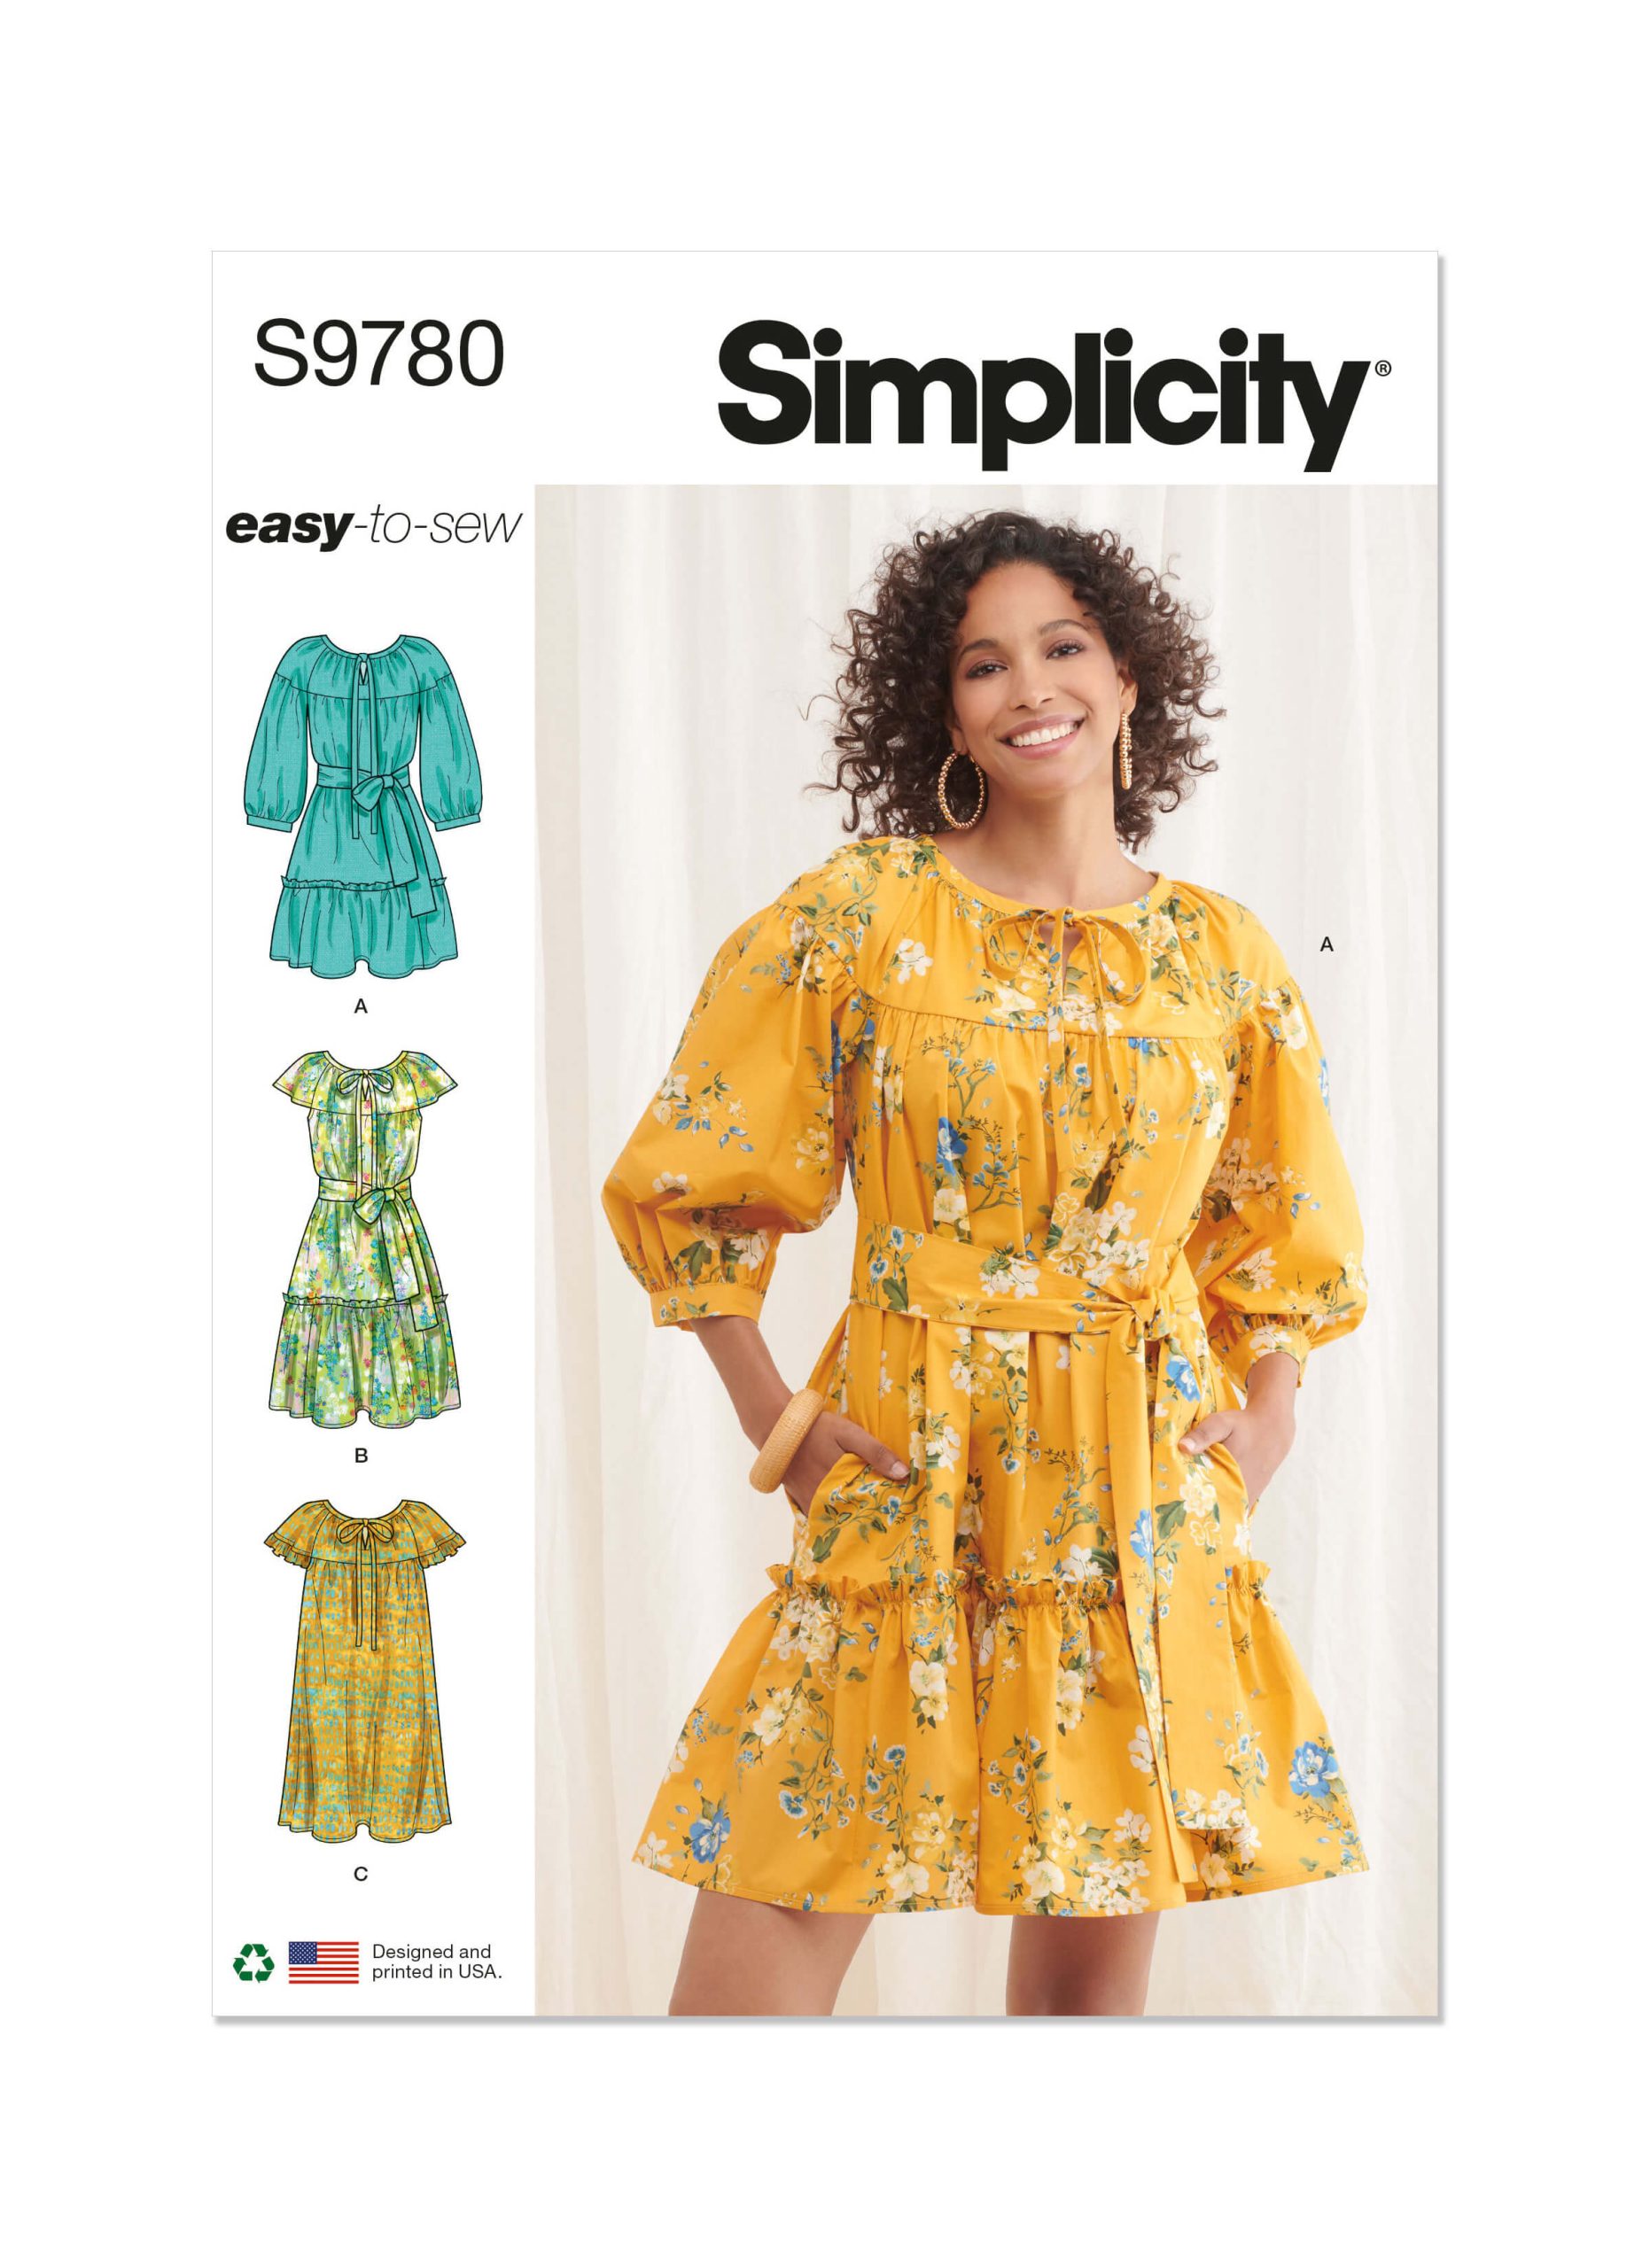 Simplicity Sewing Pattern S9780 Misses' Dresses